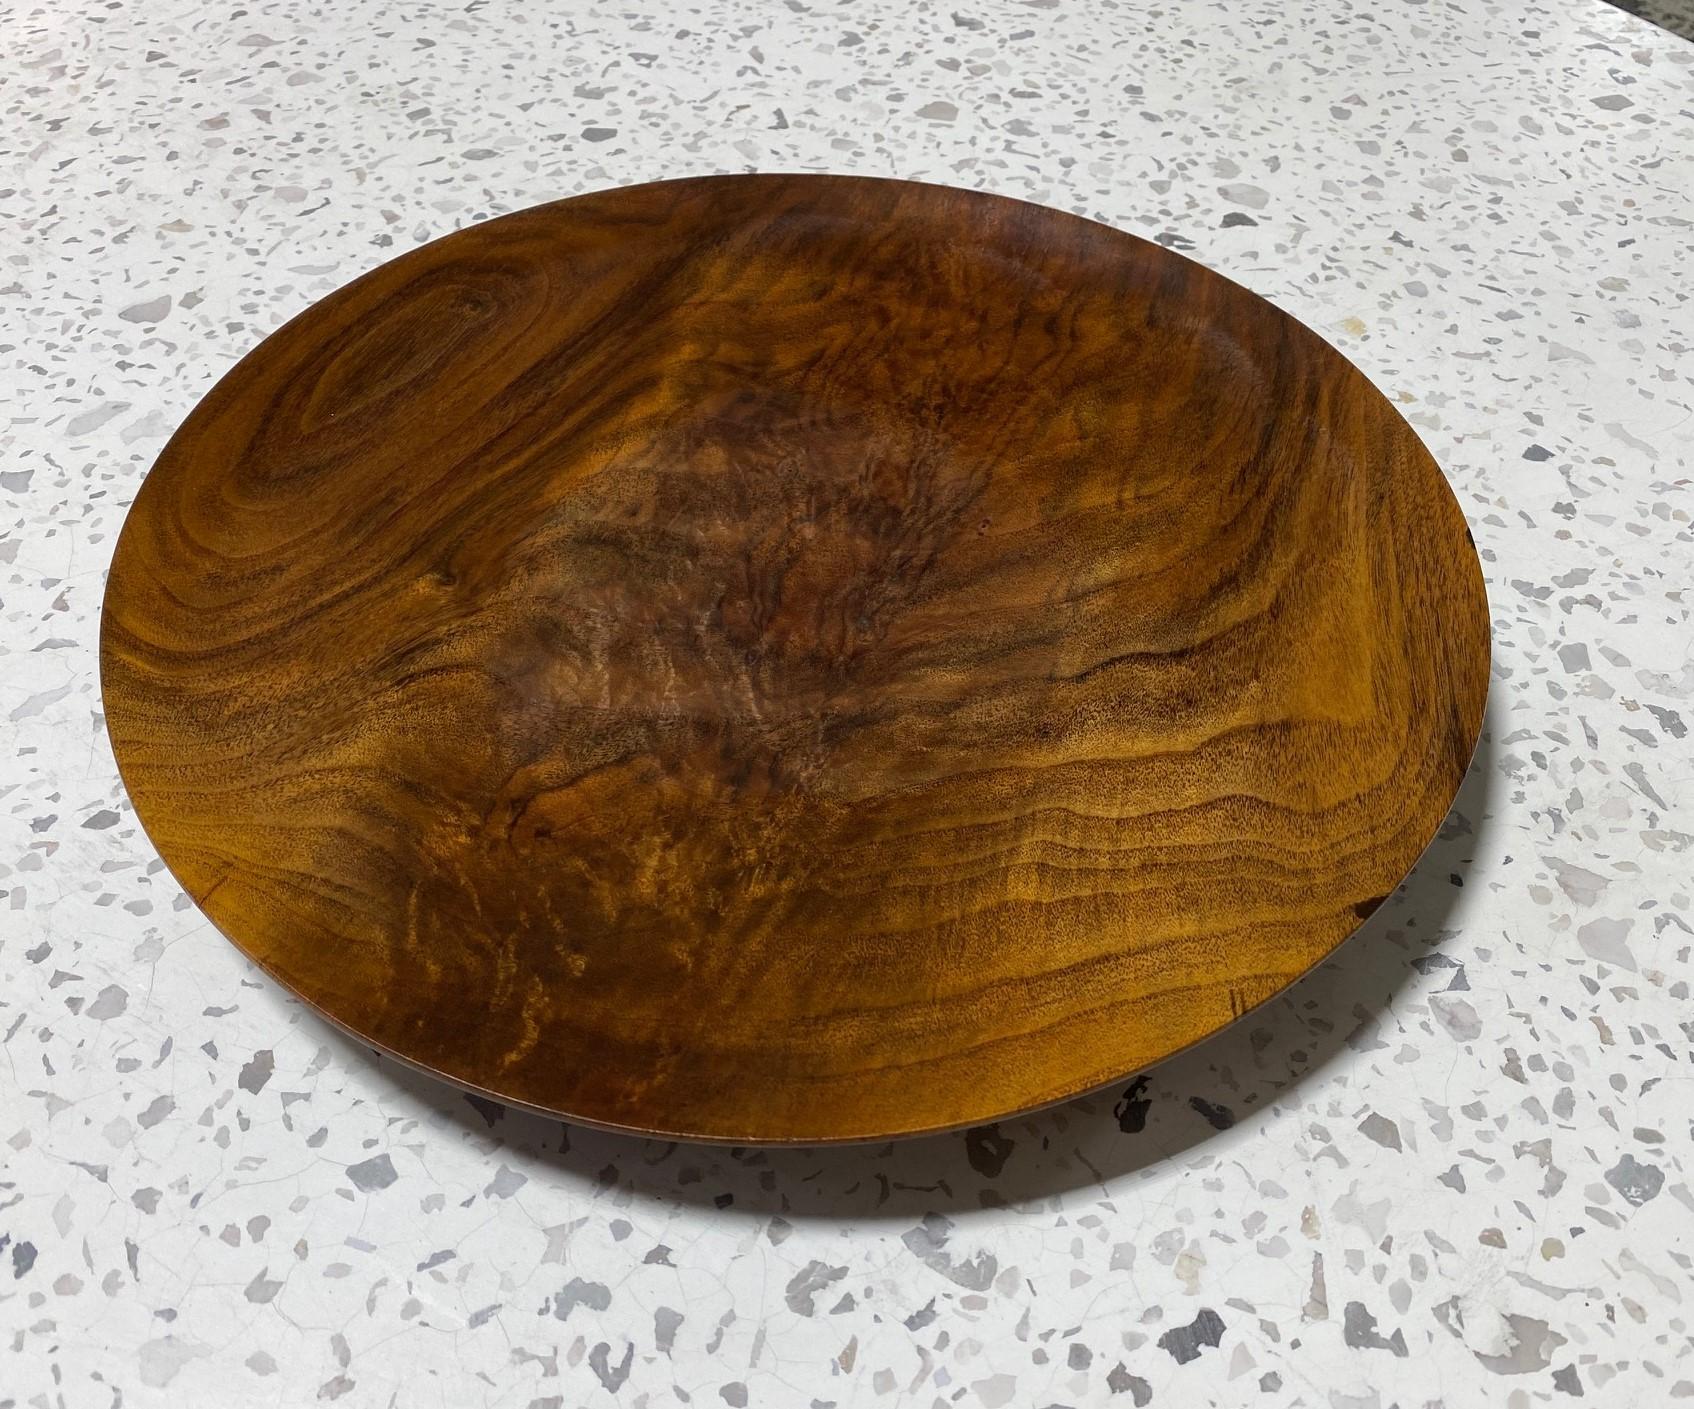 An exquisitely crafted, large wood charger/platter by American California master Woodturner Bob Stocksdale.
Signed, dated (1980) and marked (